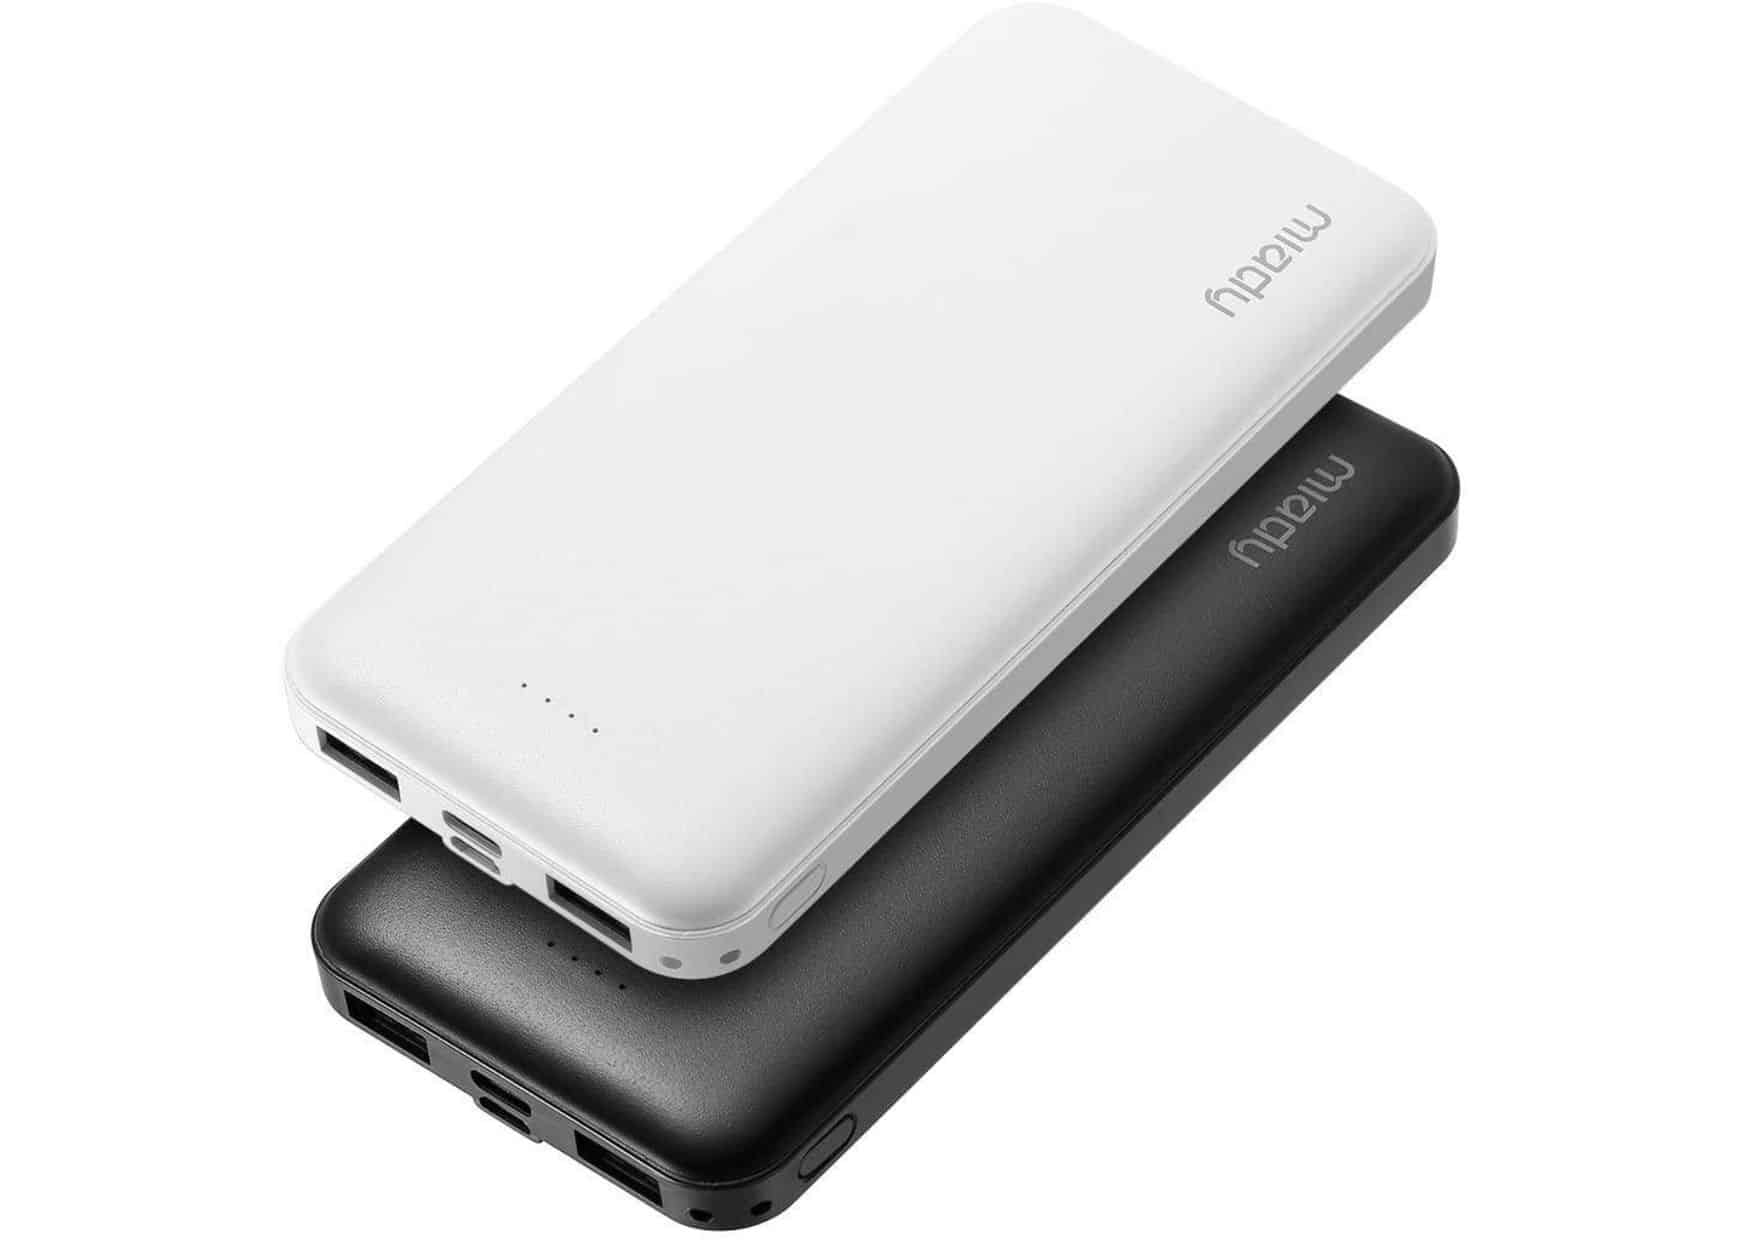 kronblad Etablering anspændt 10 Best Power Banks to Top up Your Phone at Will on the Go - LifeHack